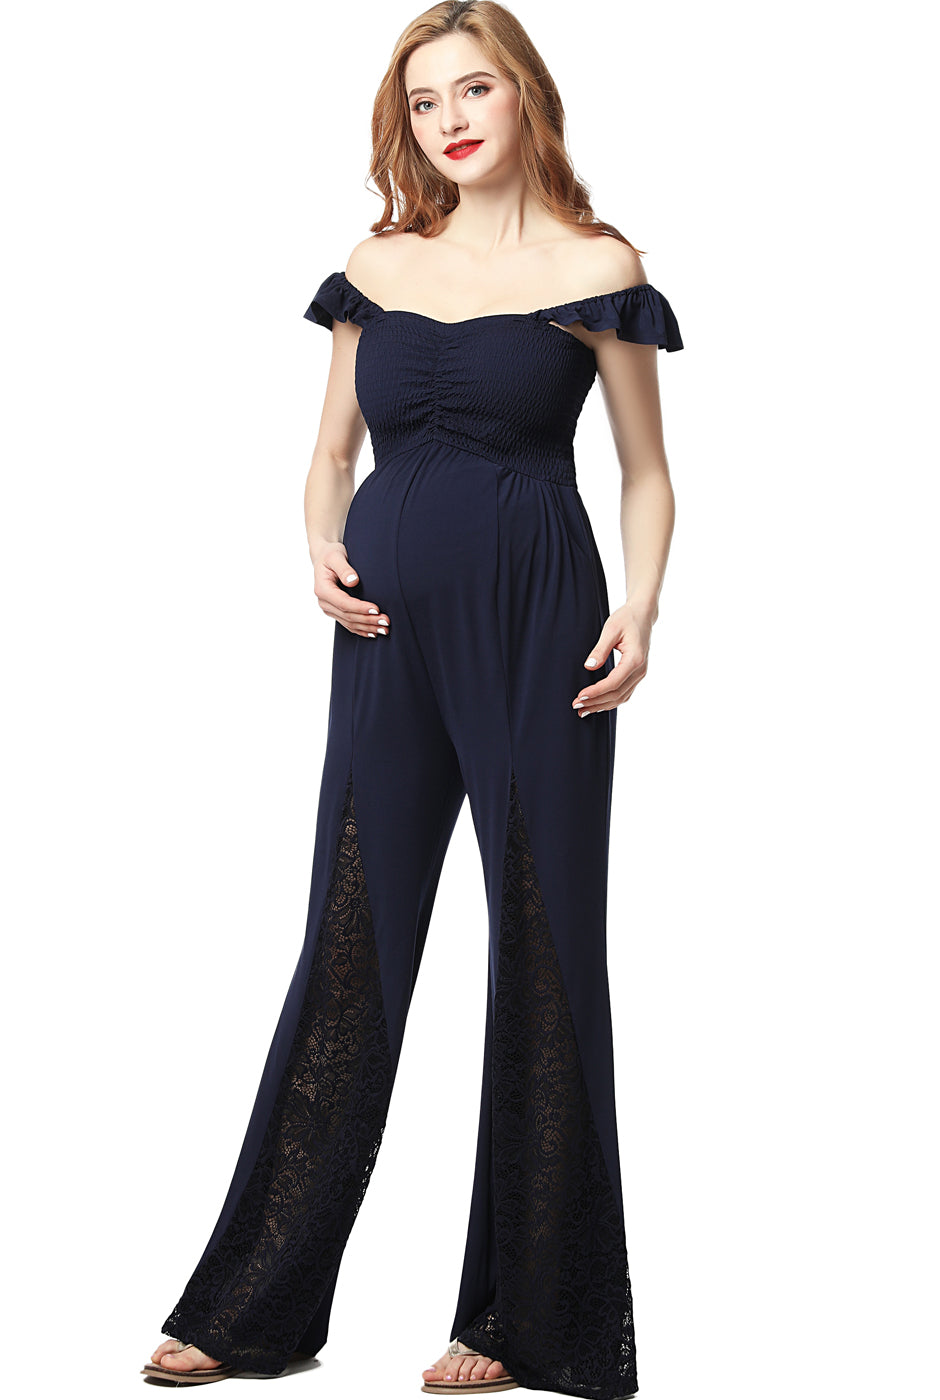 HZ.BEHAVE Maternity Jumpsuit للأمومة بدسويت بساق واسع اكمام فراشة حزام  (Color : Royal Blue, Size : XL) : Buy Online at Best Price in KSA - Souq is  now Amazon.sa: Fashion